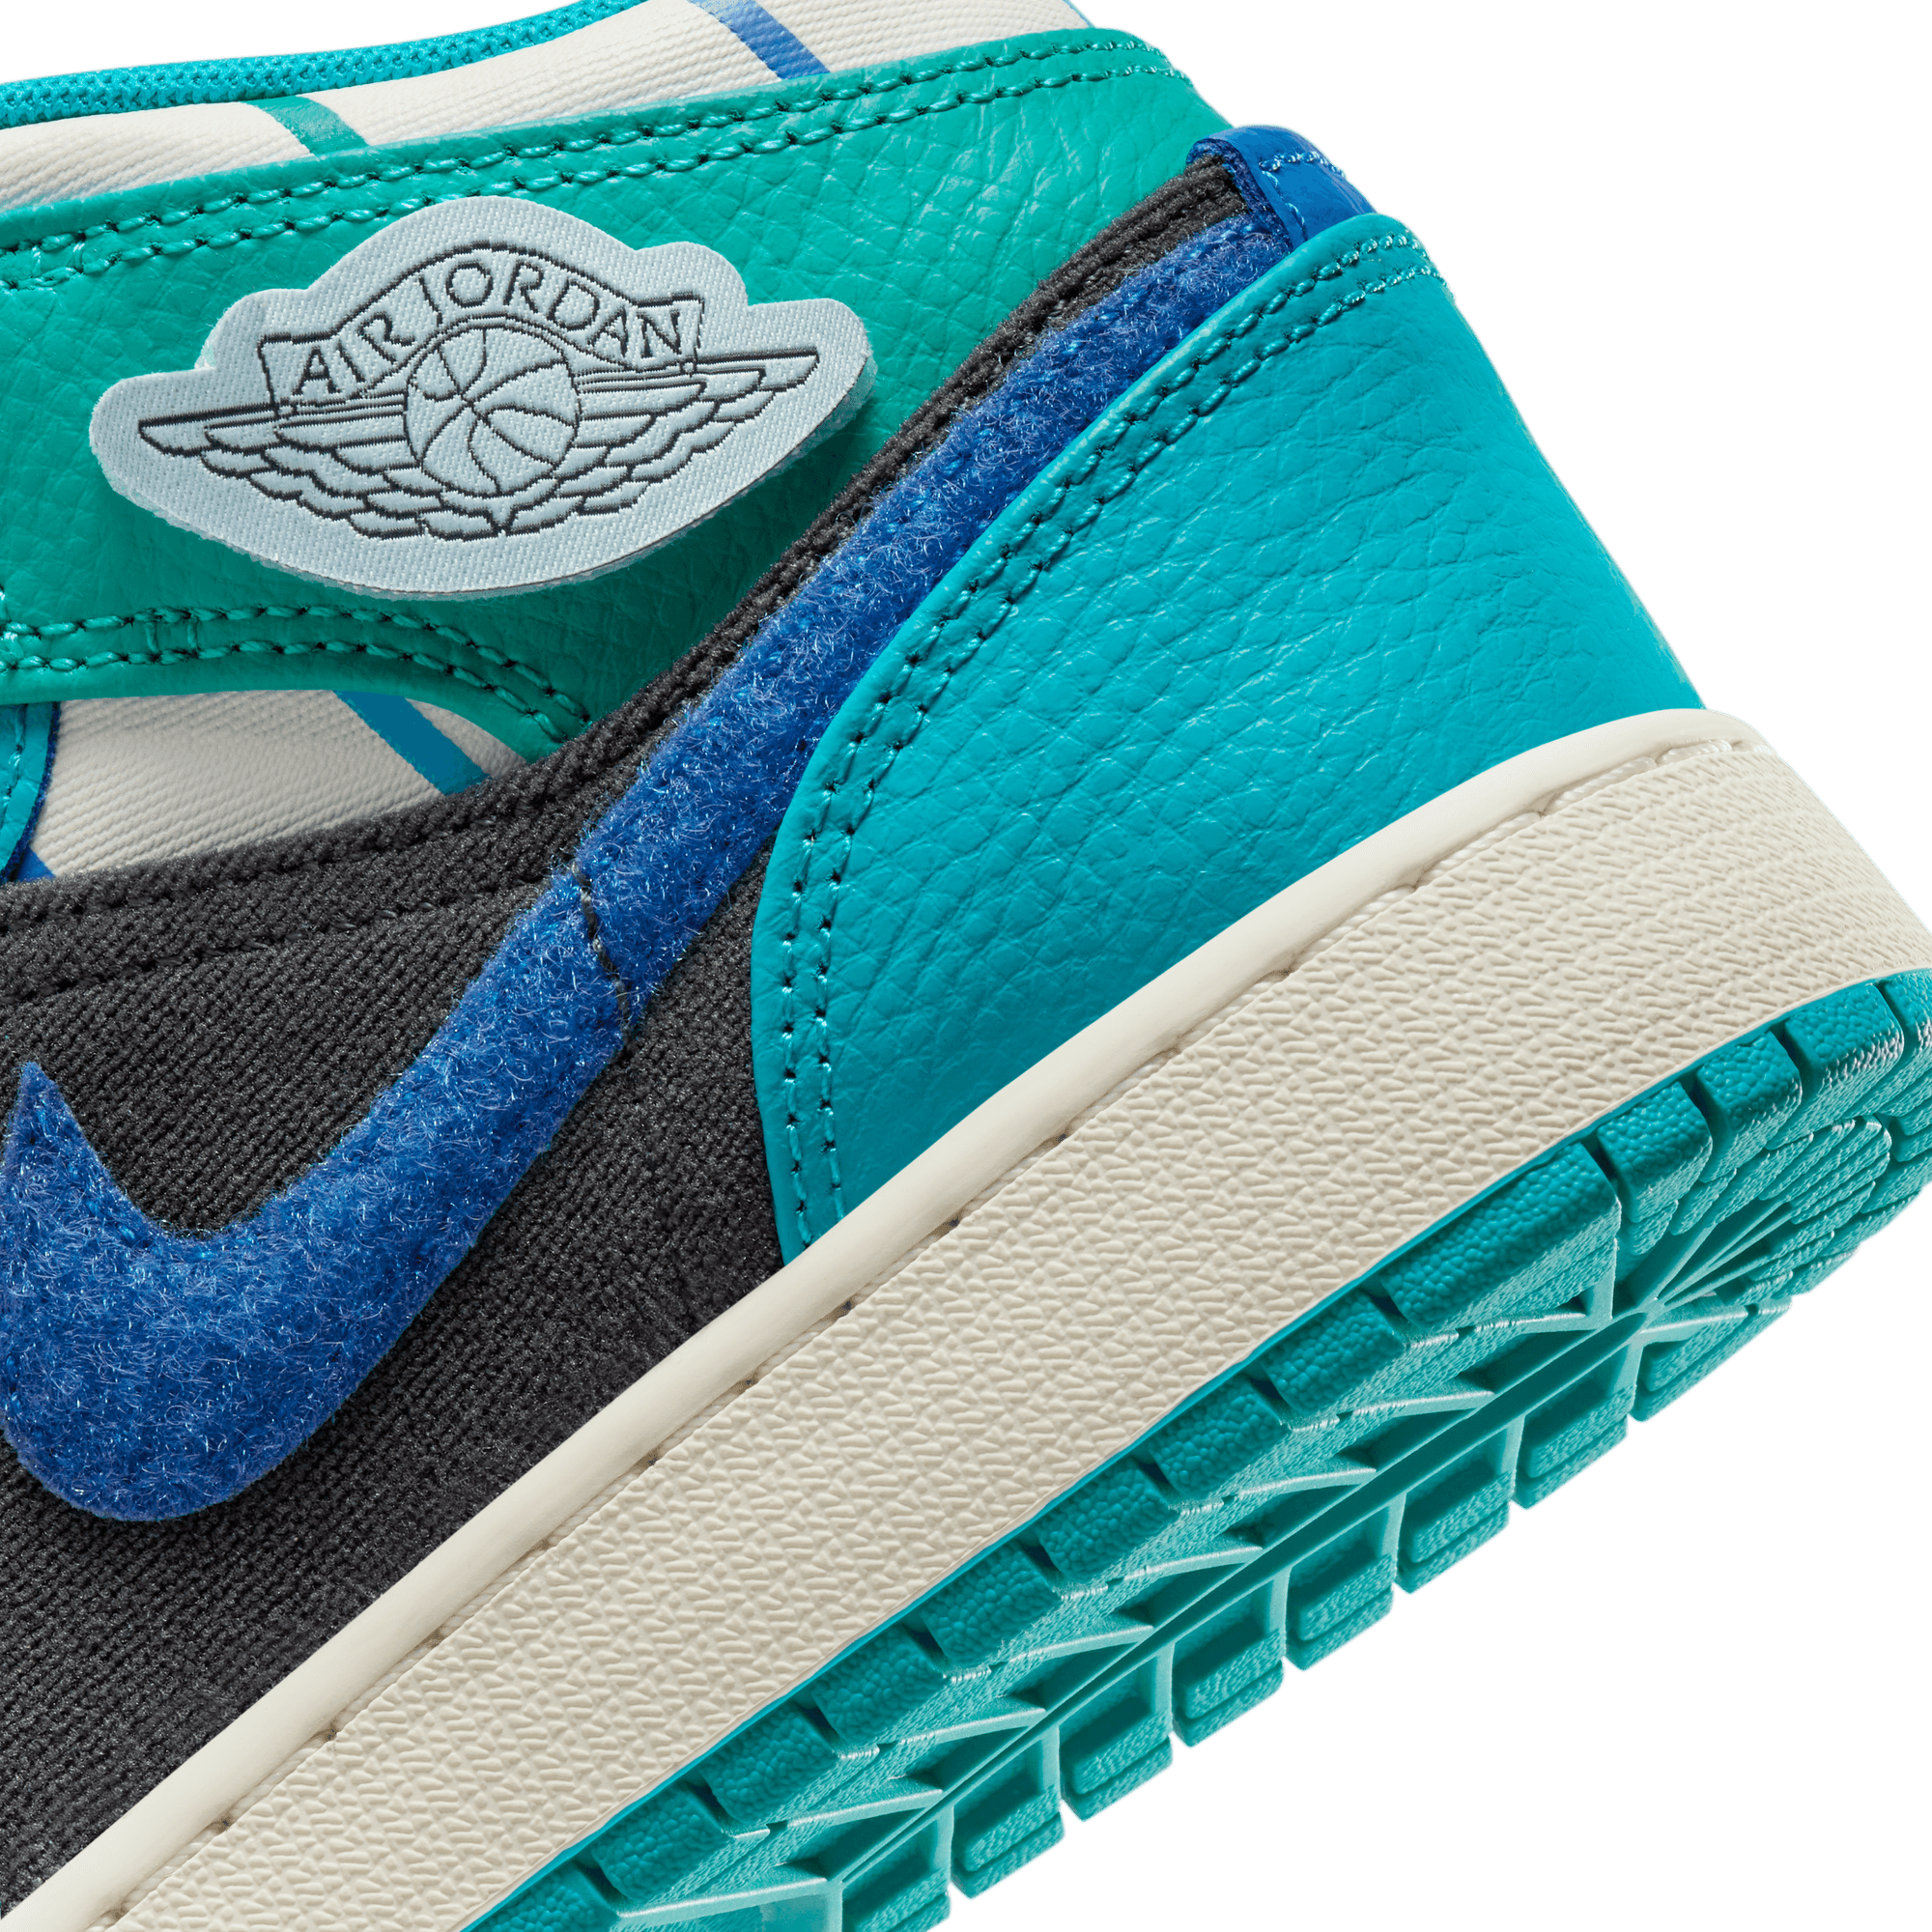 AIR JORDAN 1 MID SS (GS) "INSPIRED BY THE GREATEST"